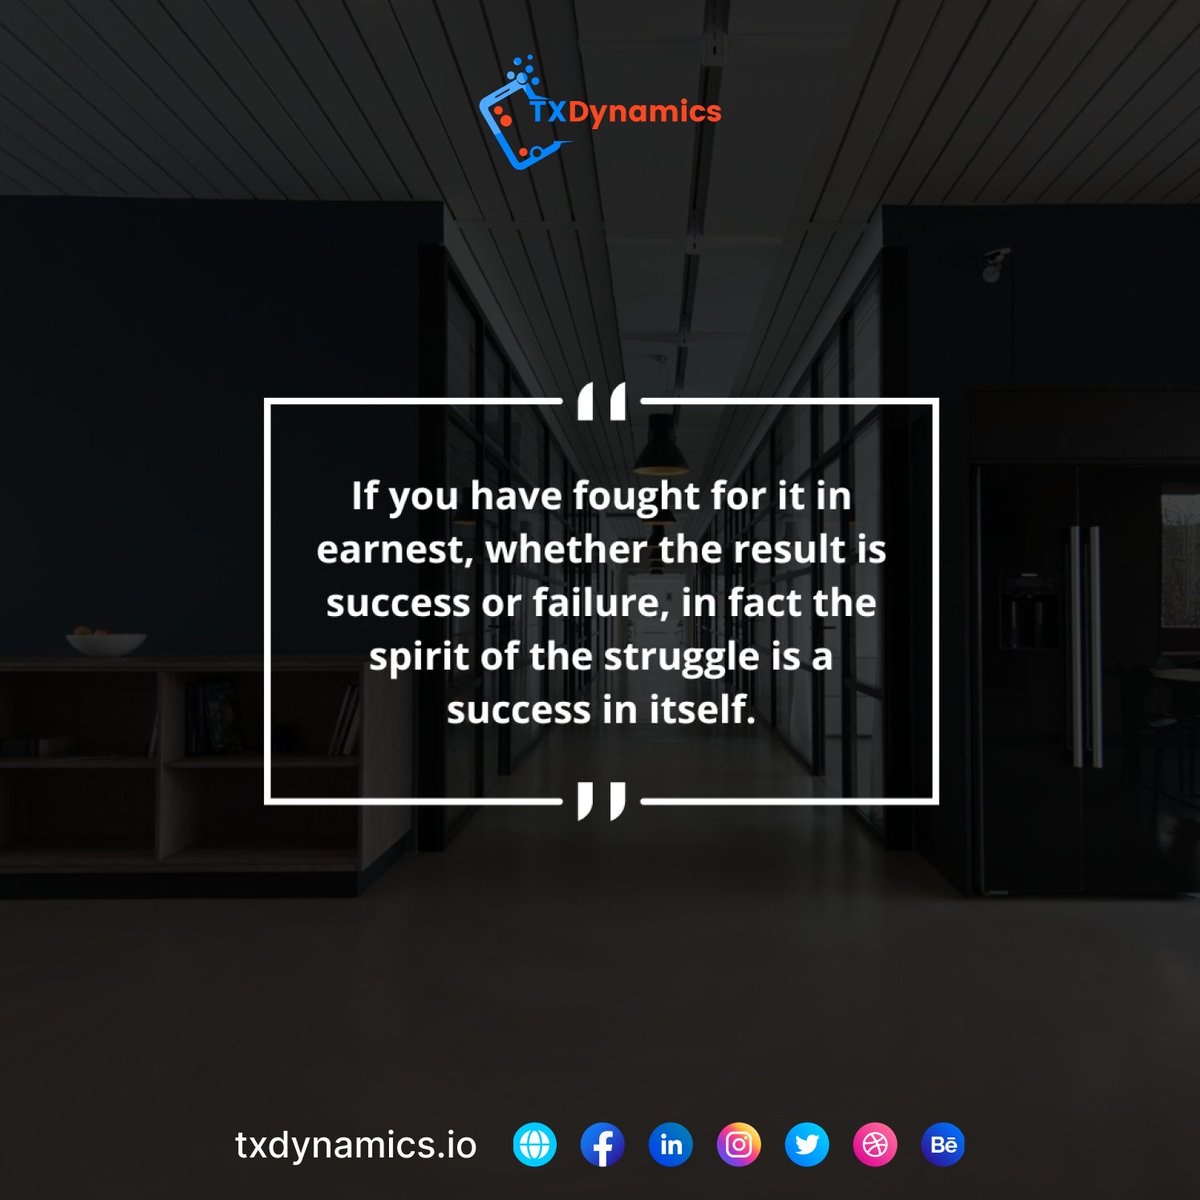 'Start each day with a grateful heart and watch your dreams come true.'

#txdynamics #MondayMotivation #MotivationMonday #MotivateMonday #MotivatingMonday #MondayGoals #MindsetMonday #MondayMood #MondayVibes #MondayBlues #MondayMotivationQuotes #MondayFunday #MondayThoughts